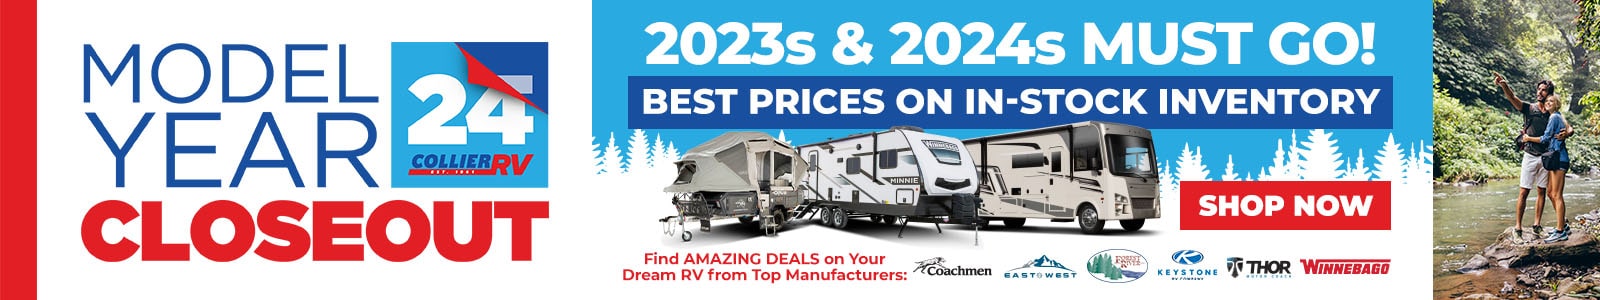 Model Year Closeout: We're Dropping Prices on 2023 & 2024 Models!